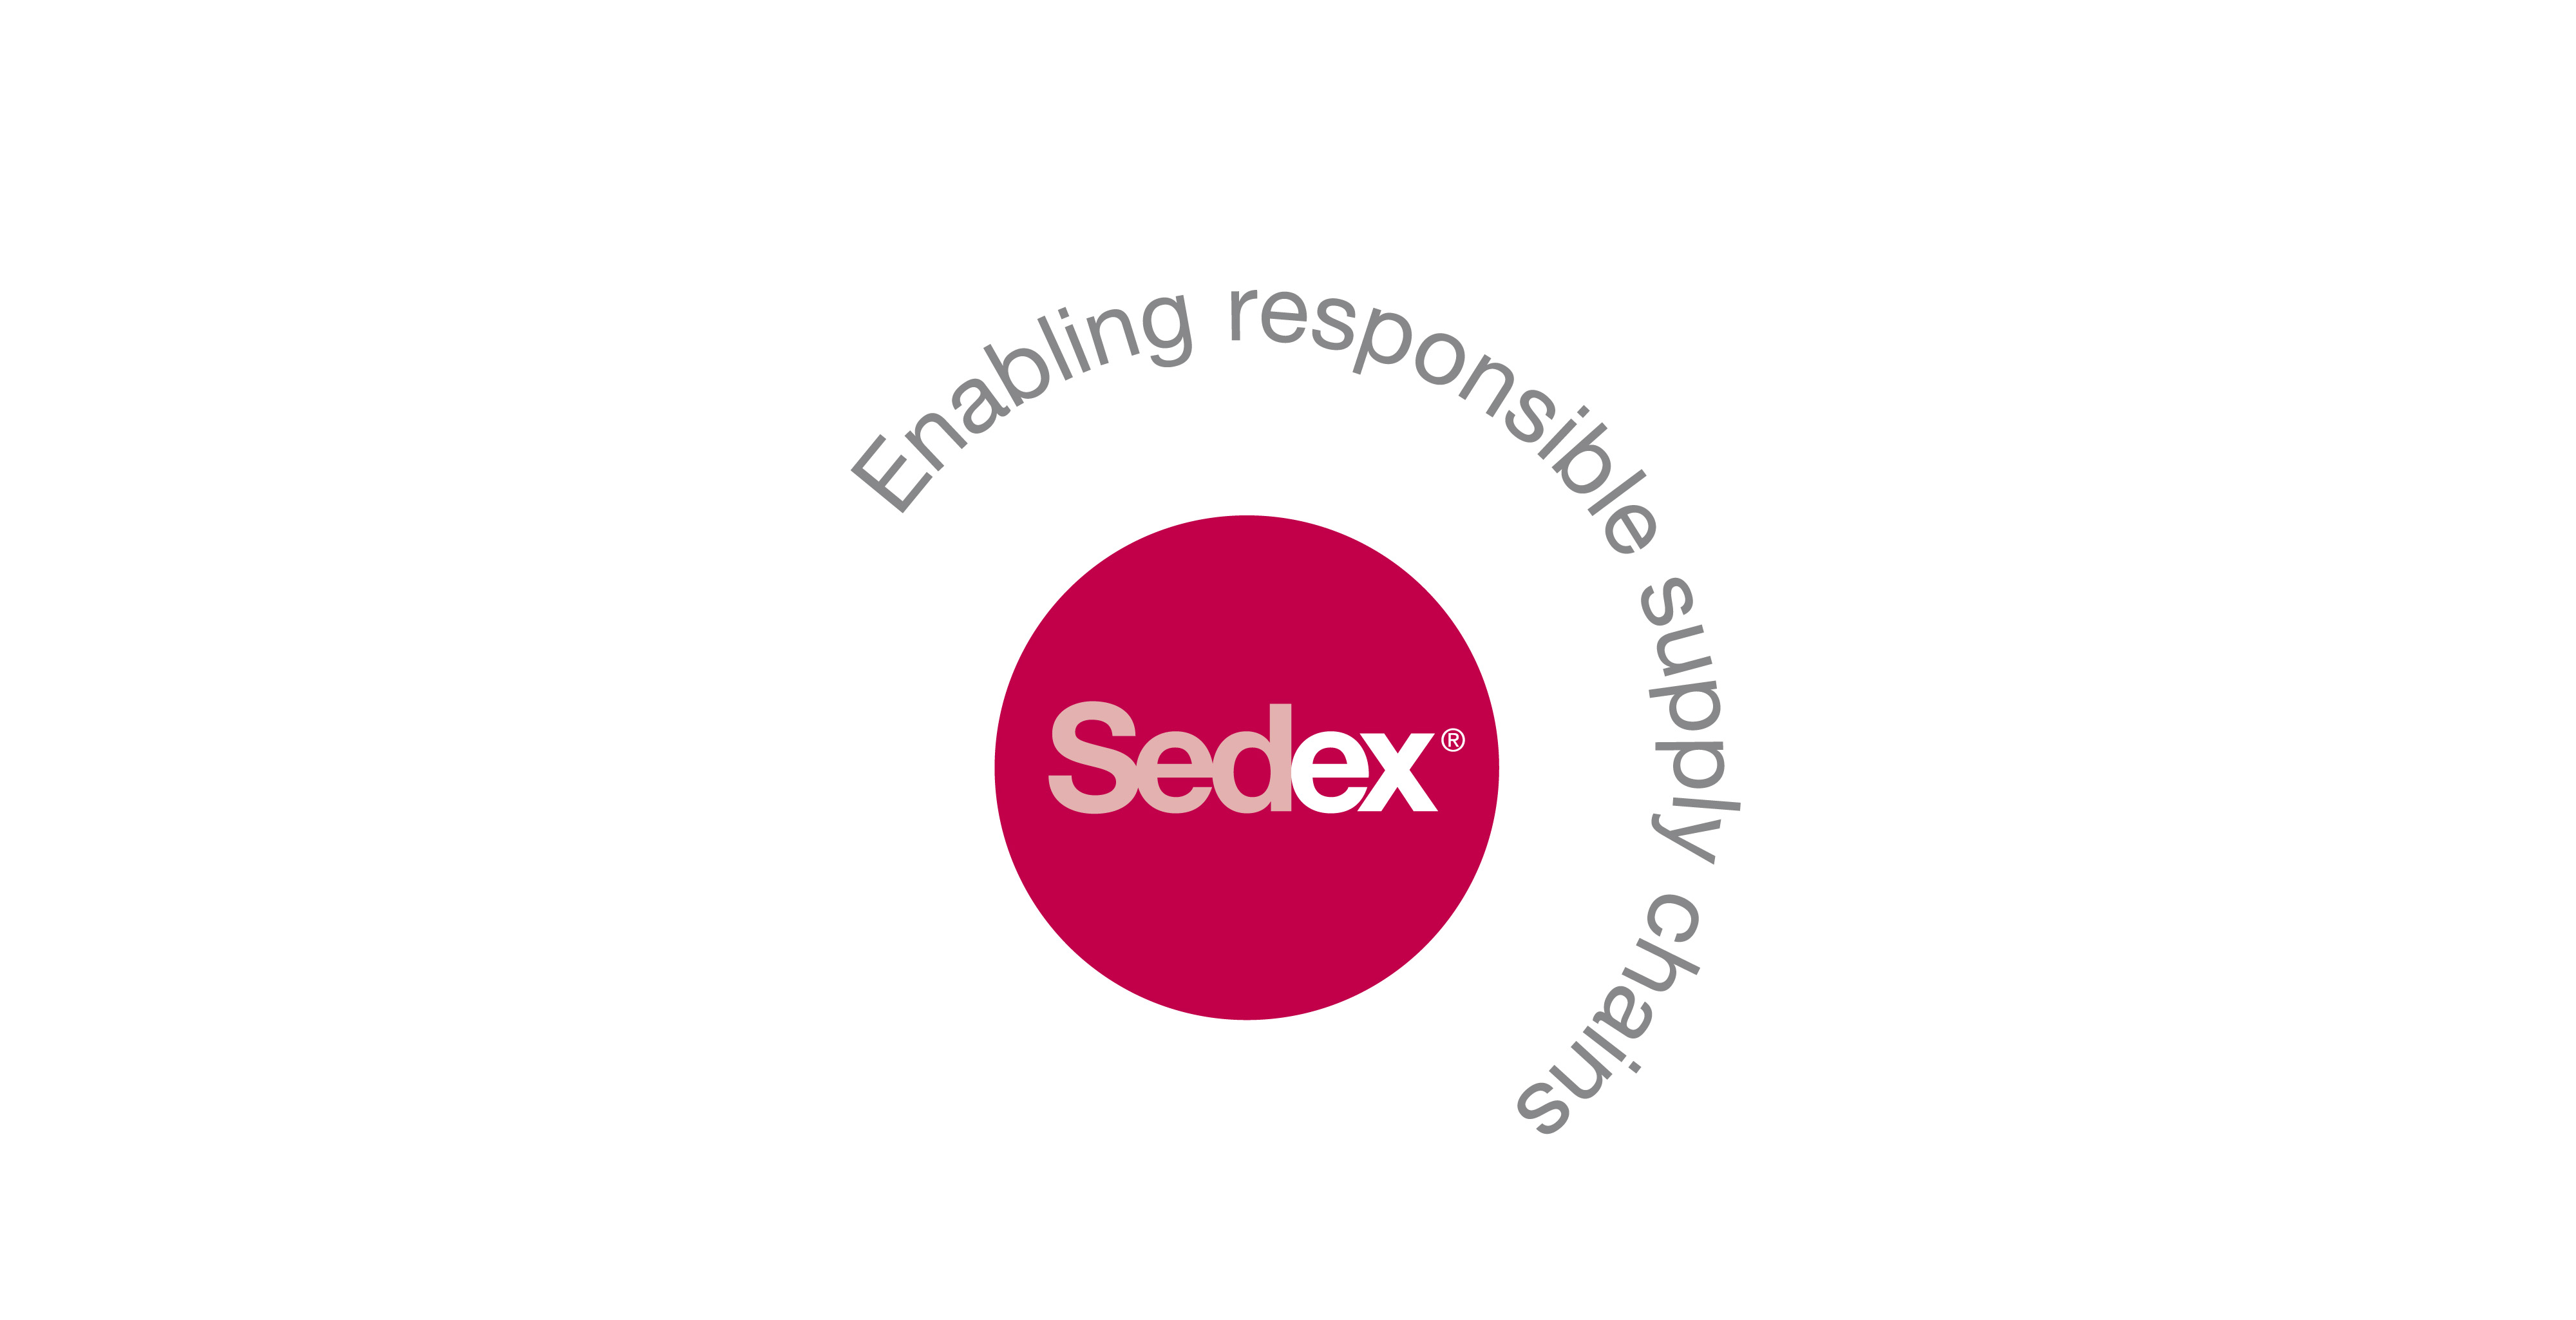 SAI Platform and Sedex join forces to improve agricultural supply chain  data and performance — SAI Platform